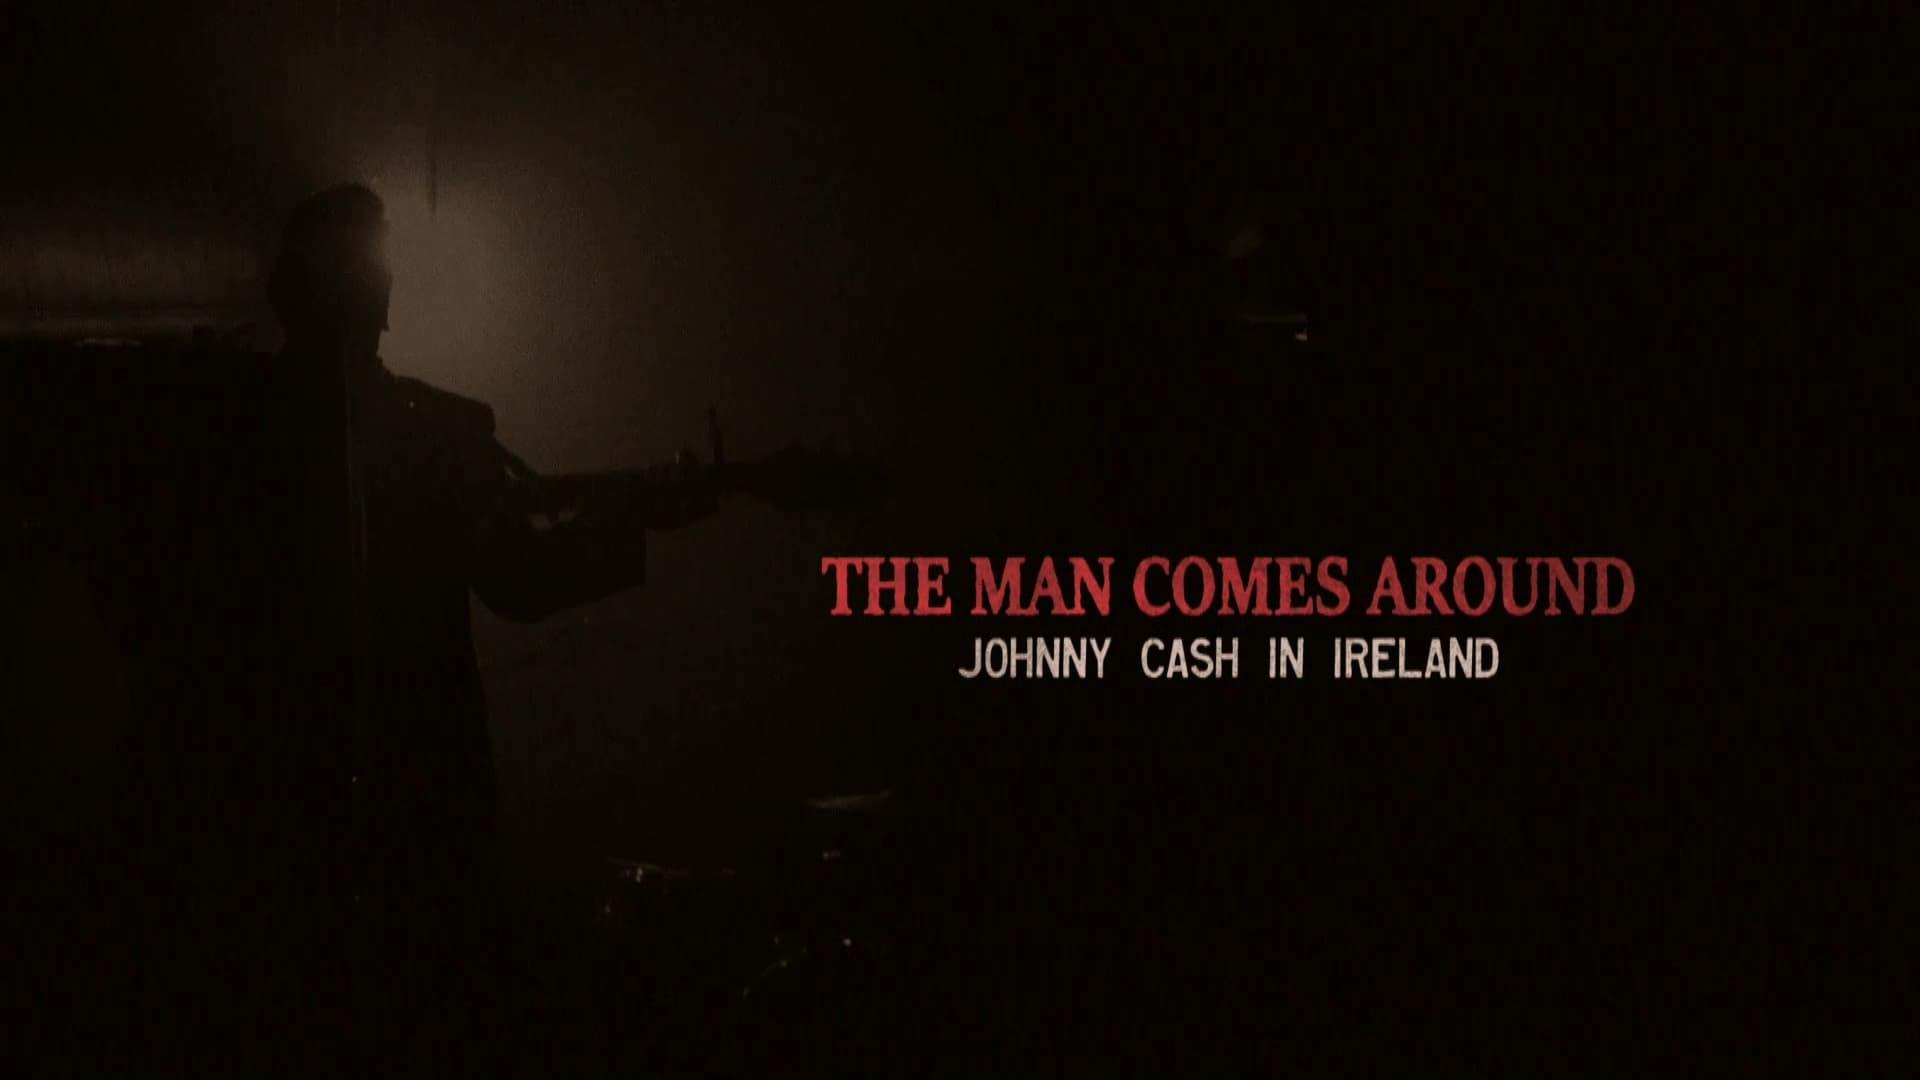 The Man Comes Around: Johnny Cash in Ireland backdrop